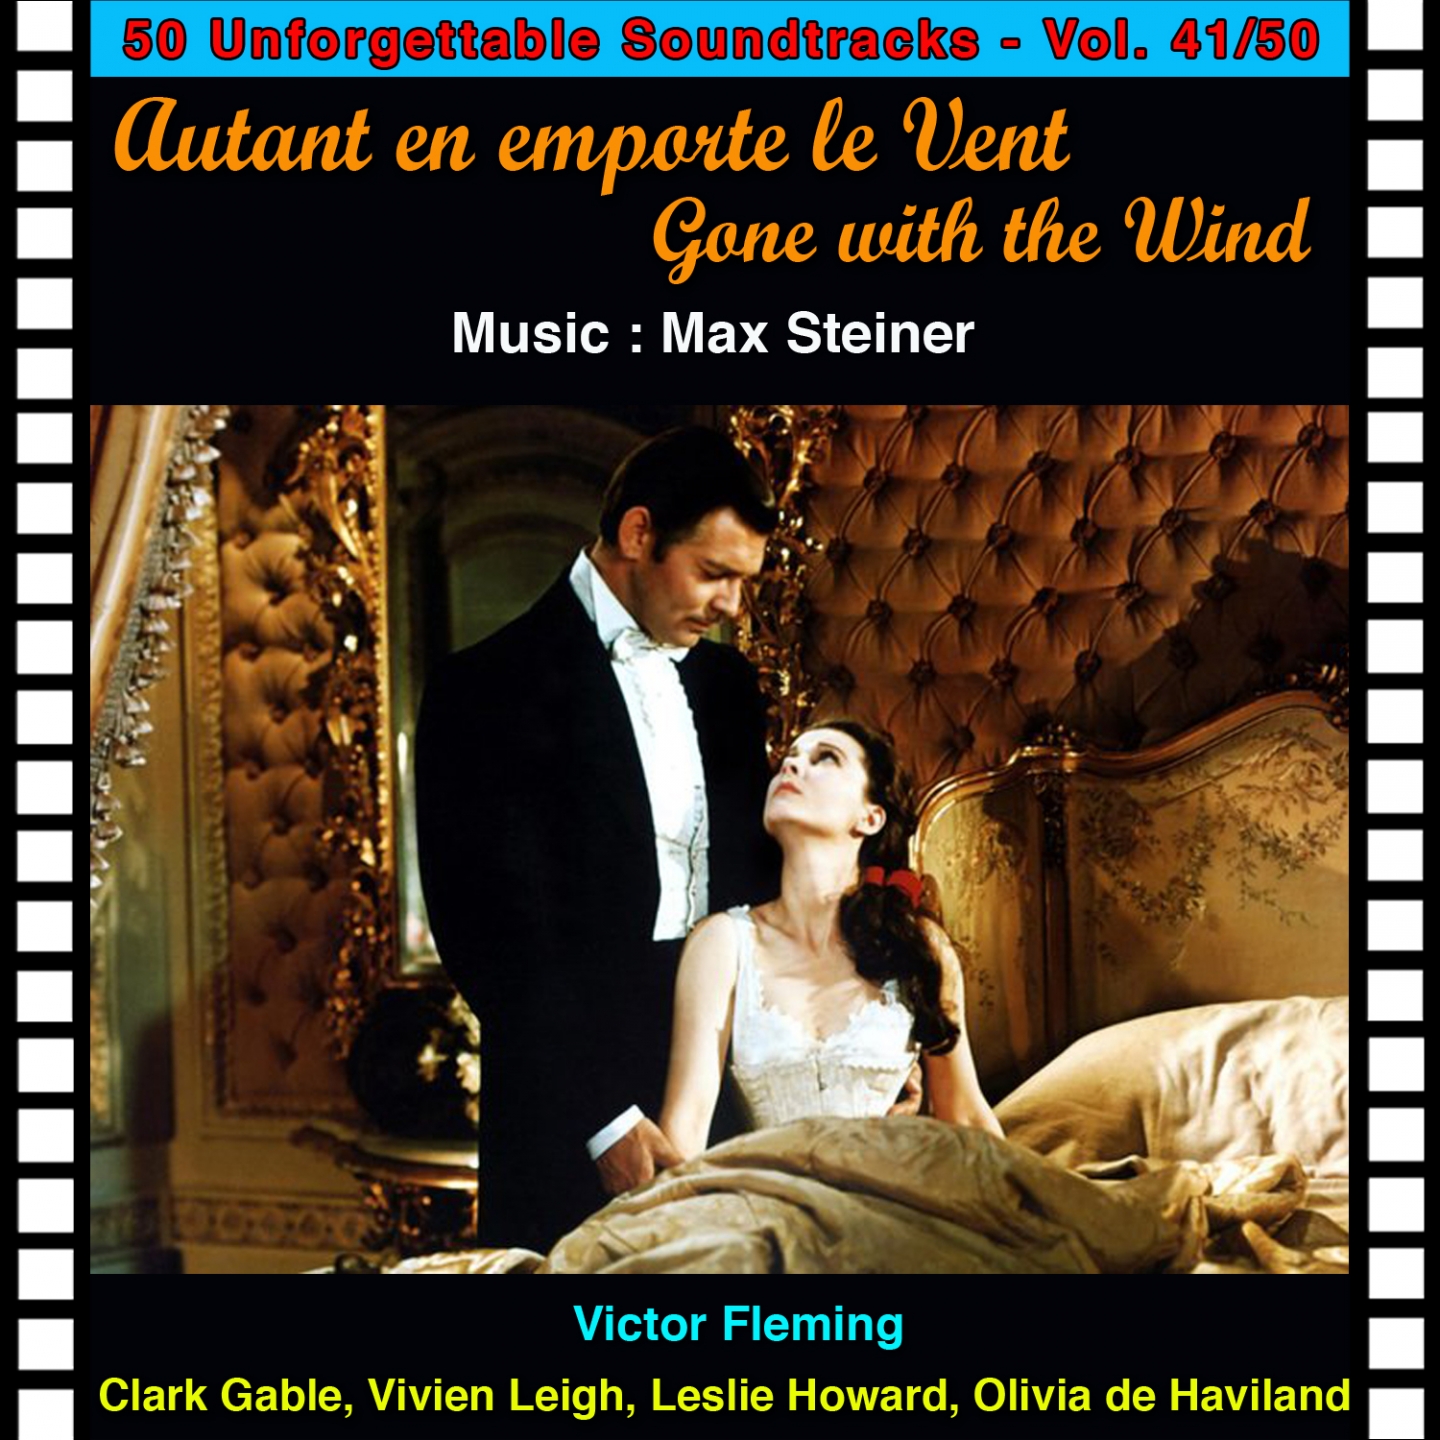 Gone with the Wind (Main Title) (Autant En Emporte Le Vent - Gone with the Wind)